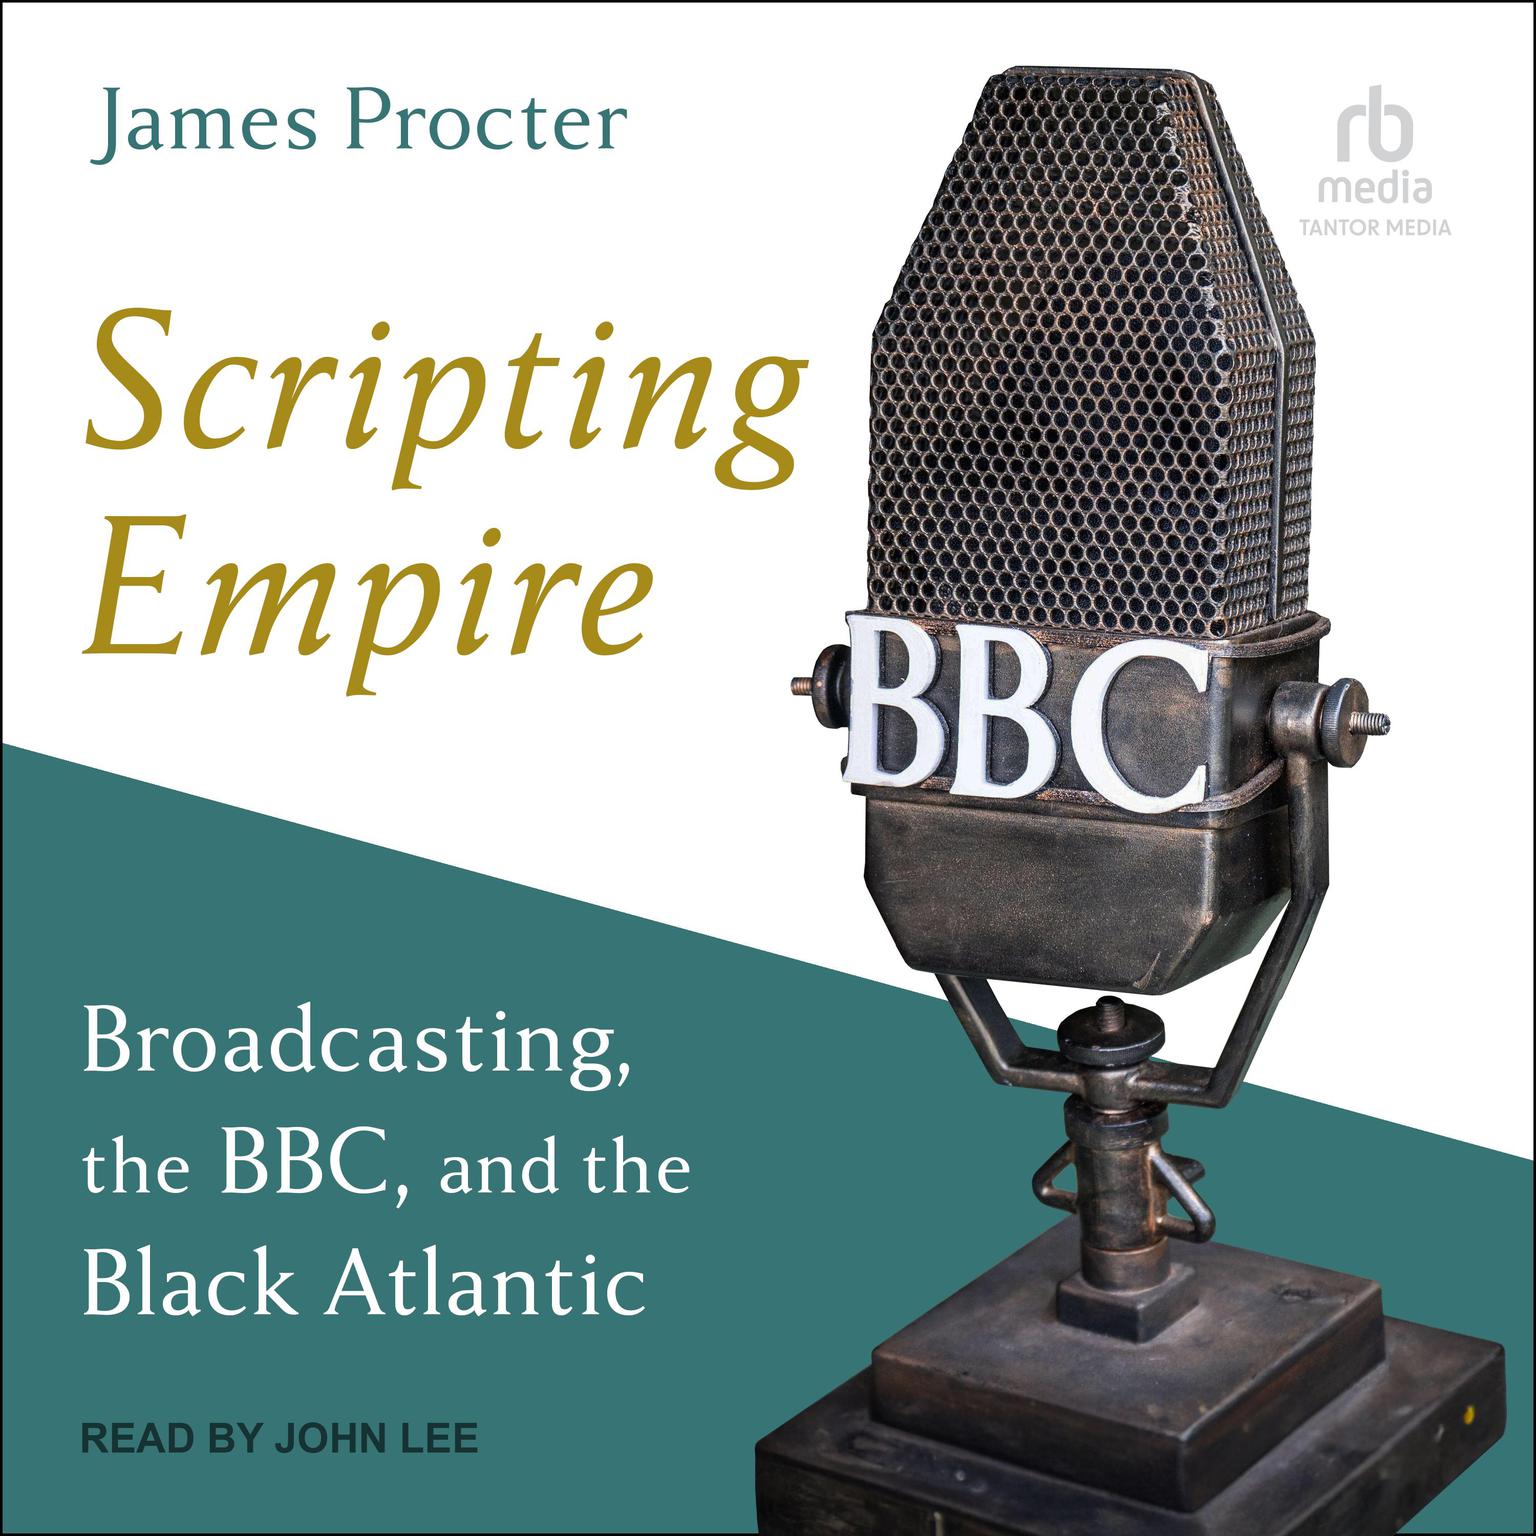 Scripting Empire: Broadcasting, the BBC, and the Black Atlantic Audiobook, by James Procter